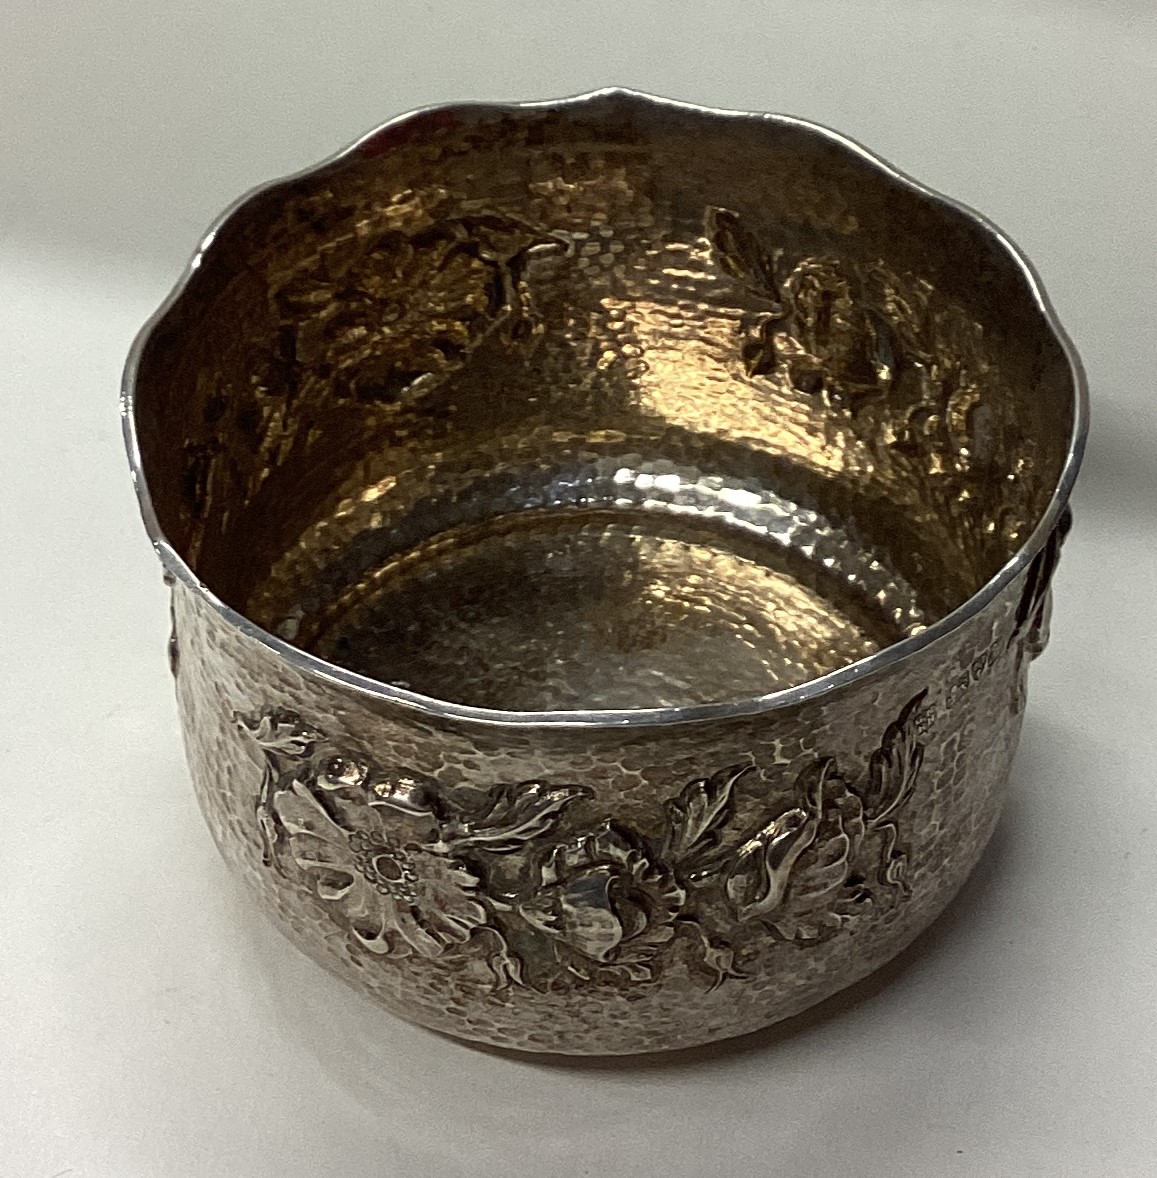 CHESTER: A fine Art Nouveau silver rose bowl with chased decoration. - Image 2 of 3